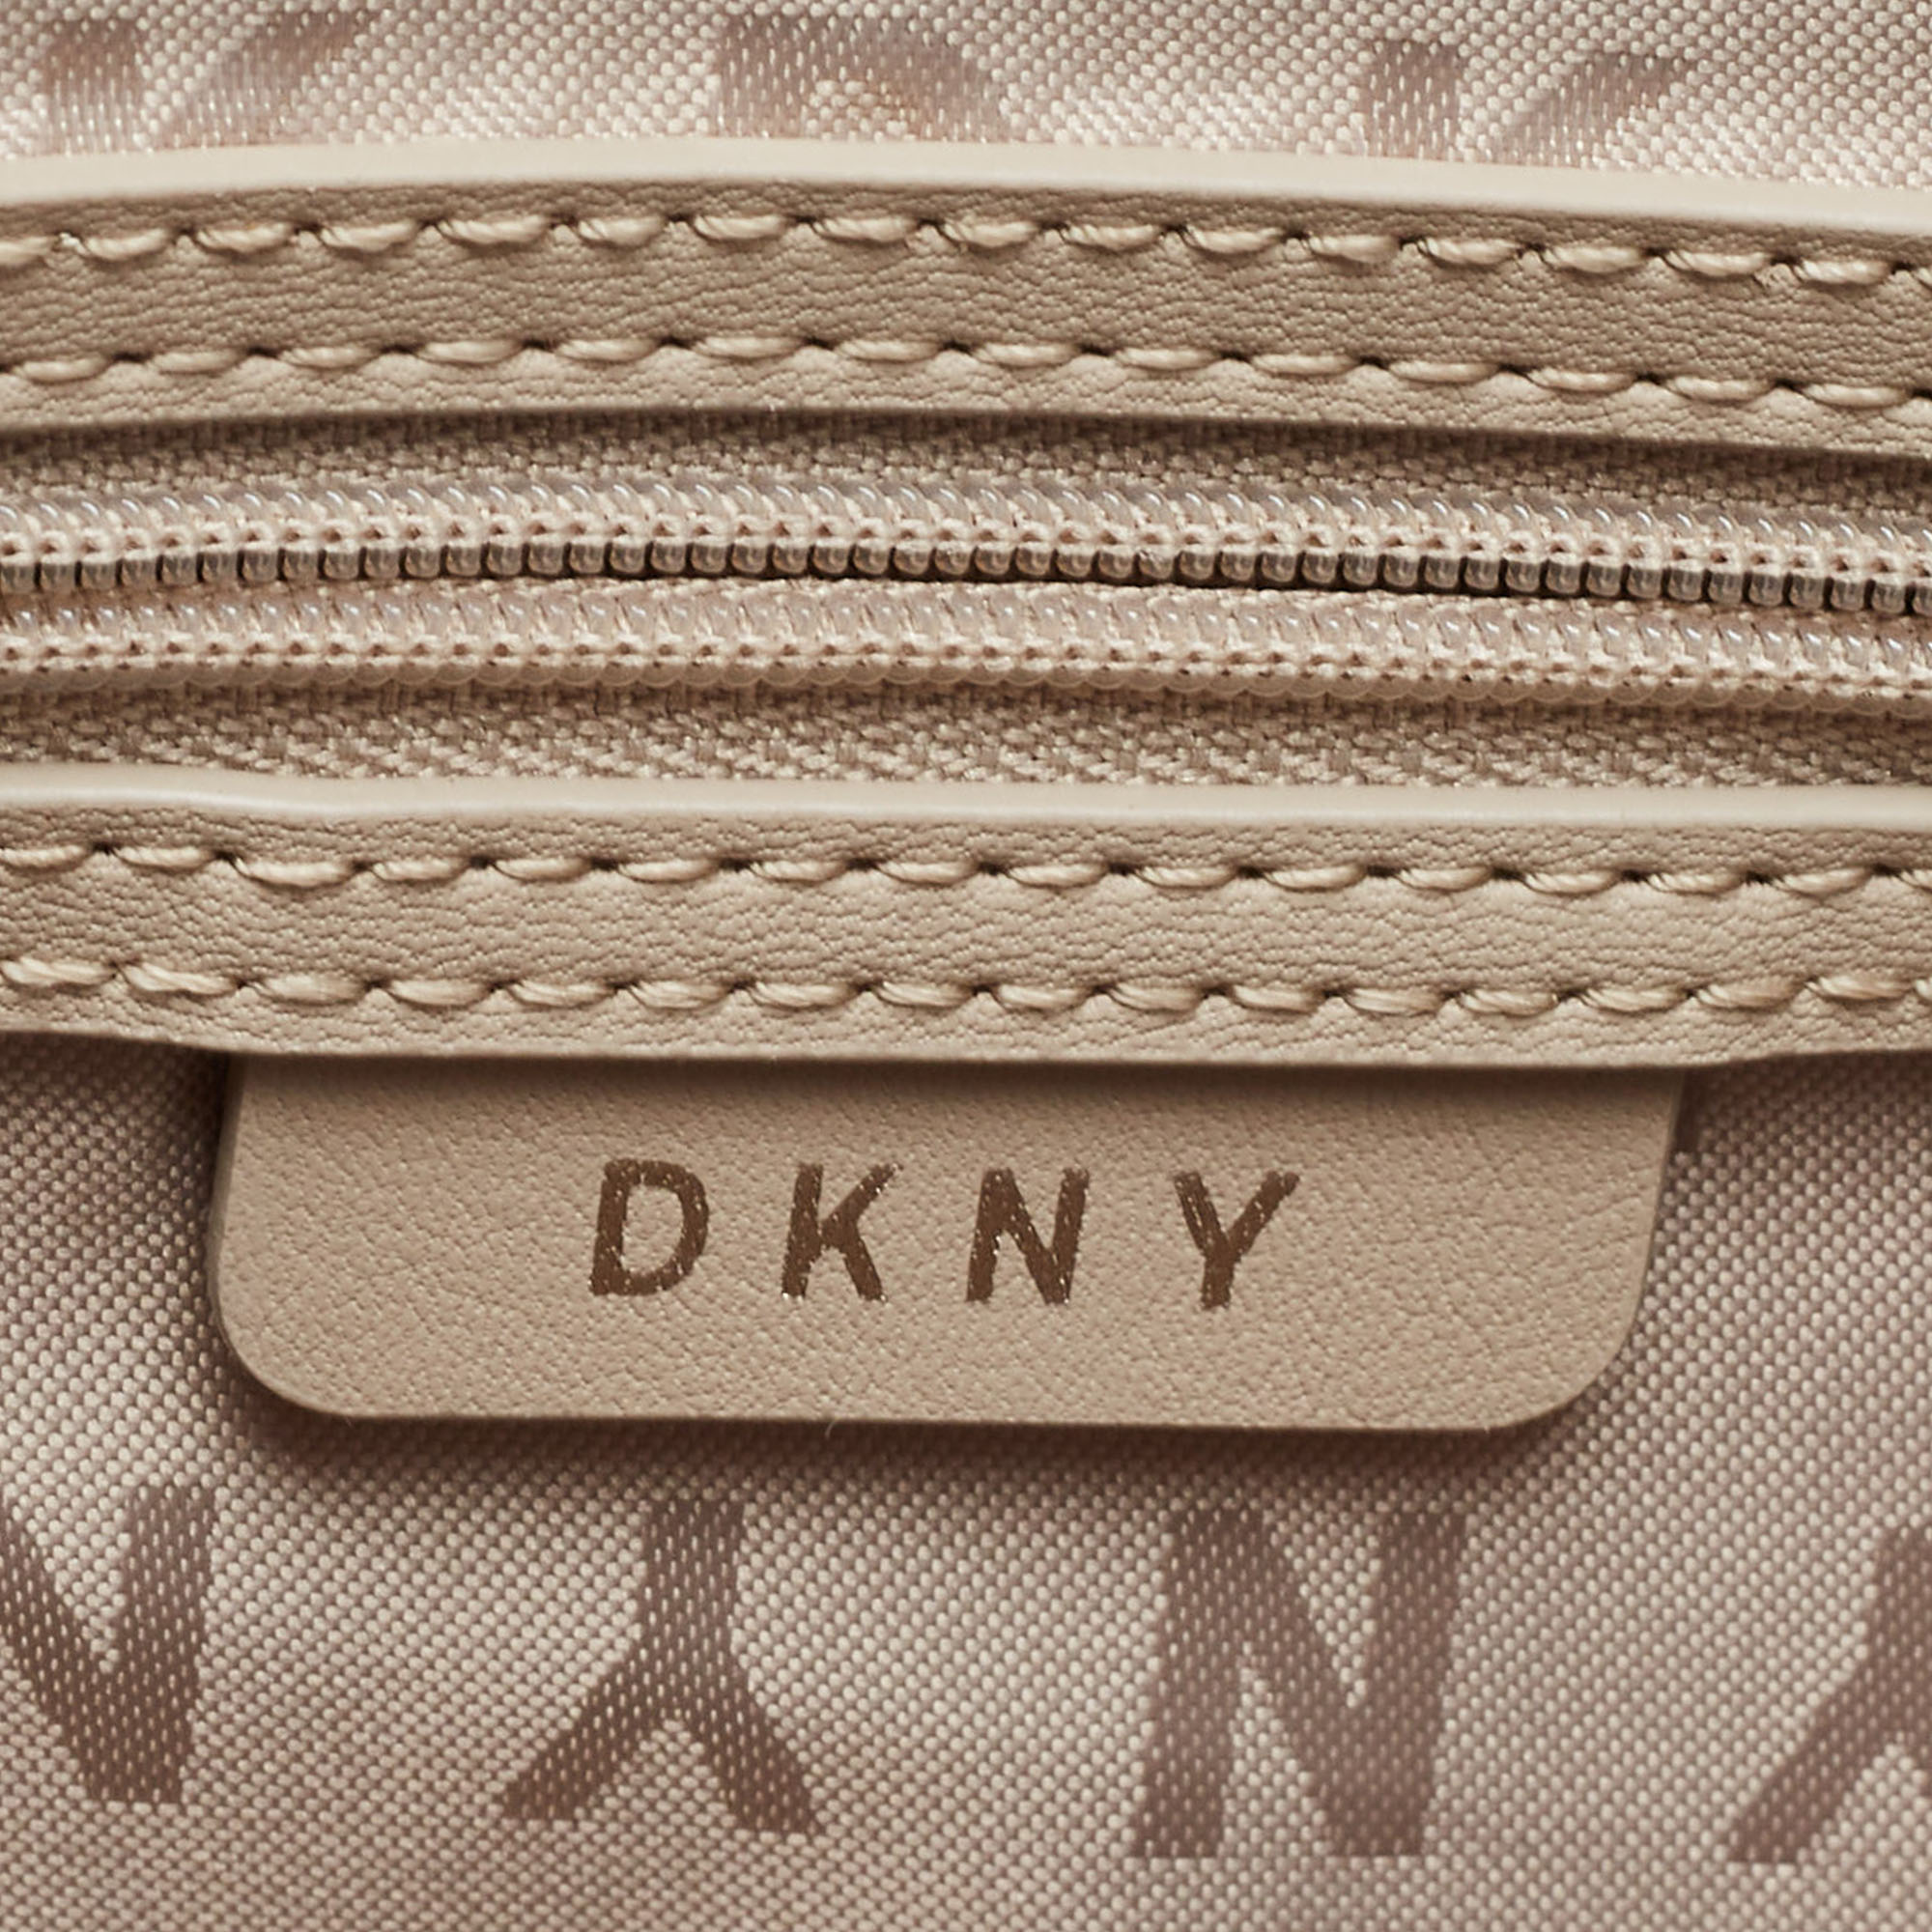 DKNY Beige/Brown Signature Coated Canvas And Leather Top Zip Shopper Tote